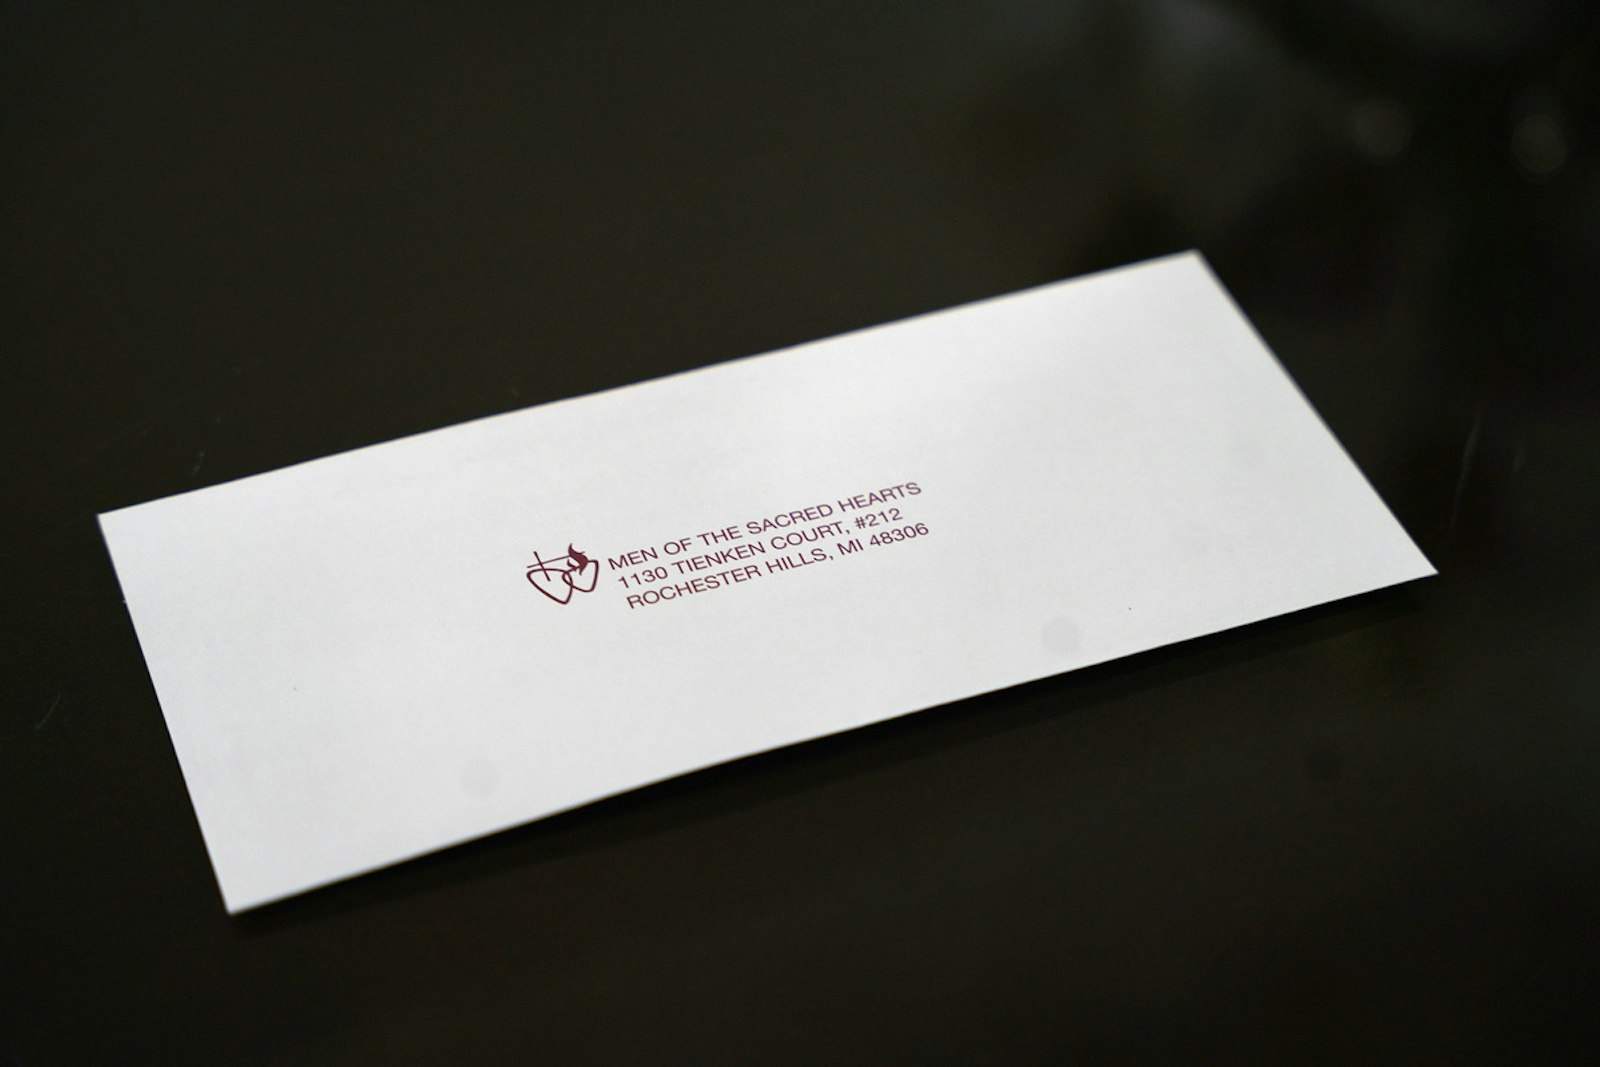 The Men of the Sacred Hearts leave behind an envelope and contact information for families to give out to others who might be interested in having the Sacred Heart of Jesus enthroned in their homes.